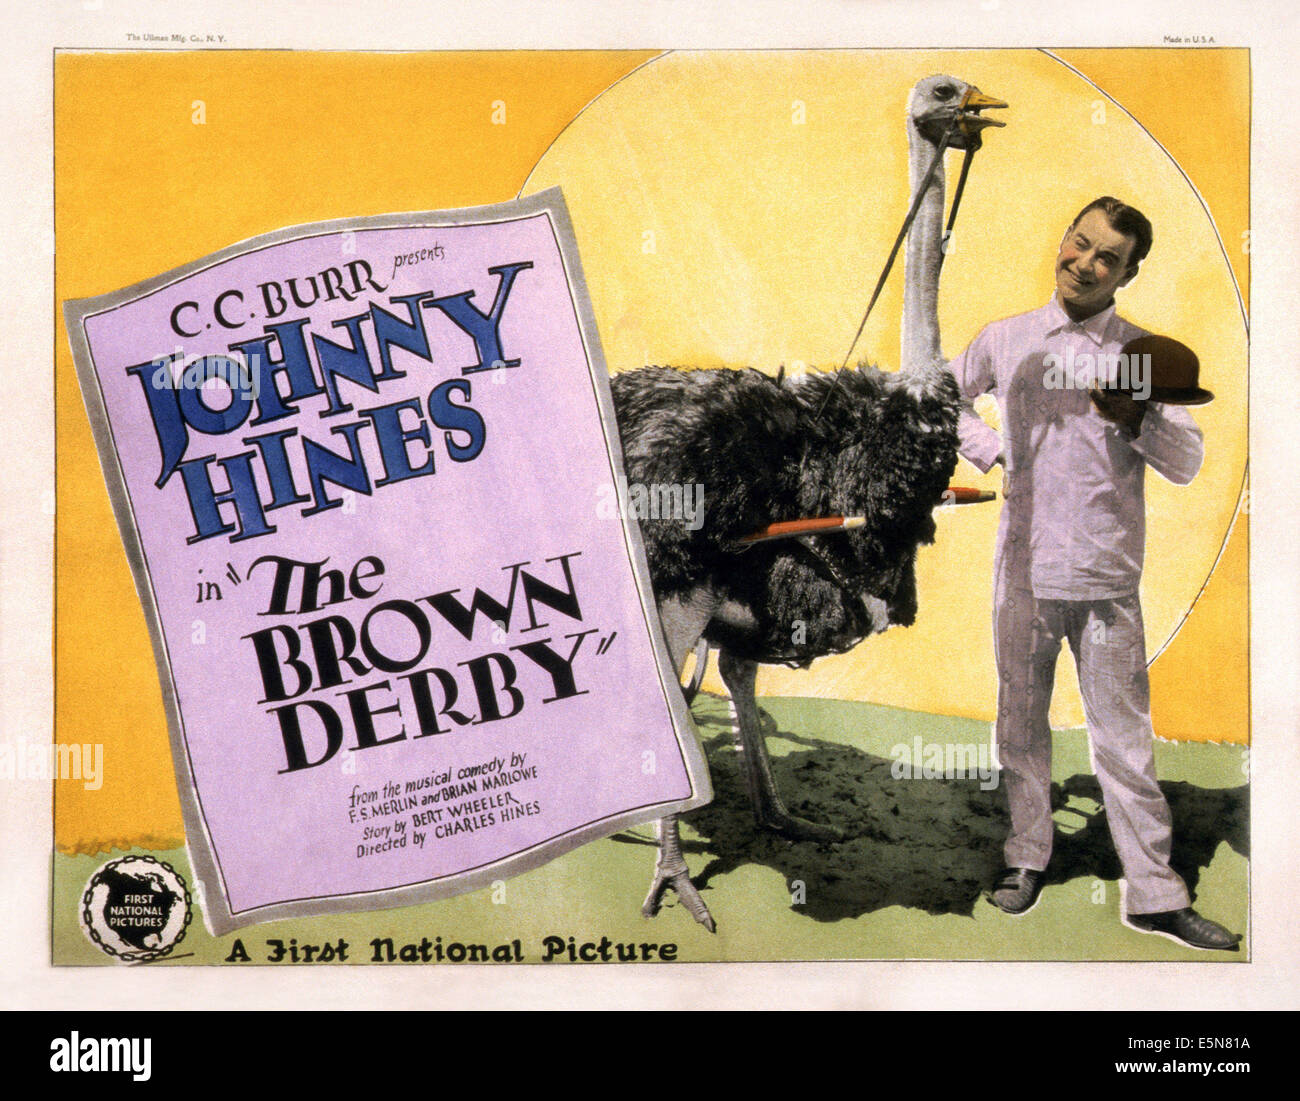 THE BROWN DERBY, Johnny Hines, 1926 Stock Photo